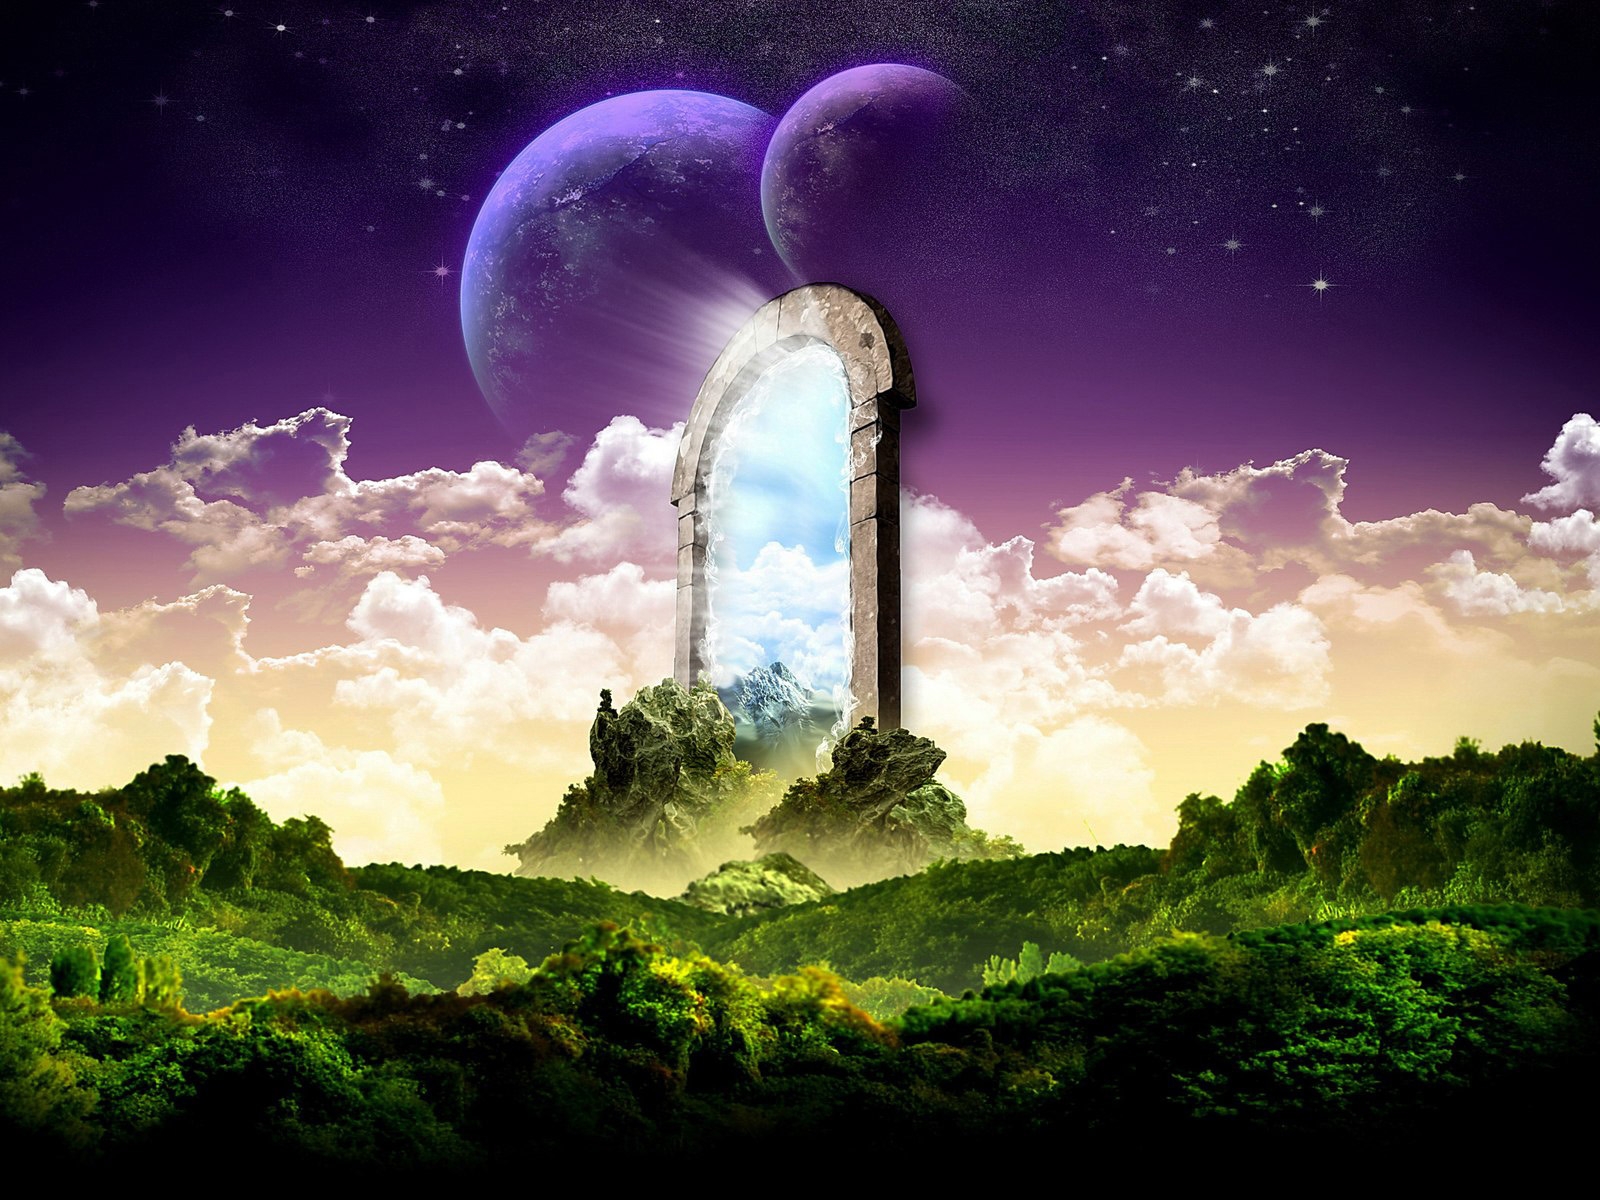  Fantasy Dream and CG Wallpapers Collection   Wallpapers   RecipeApart 1600x1200